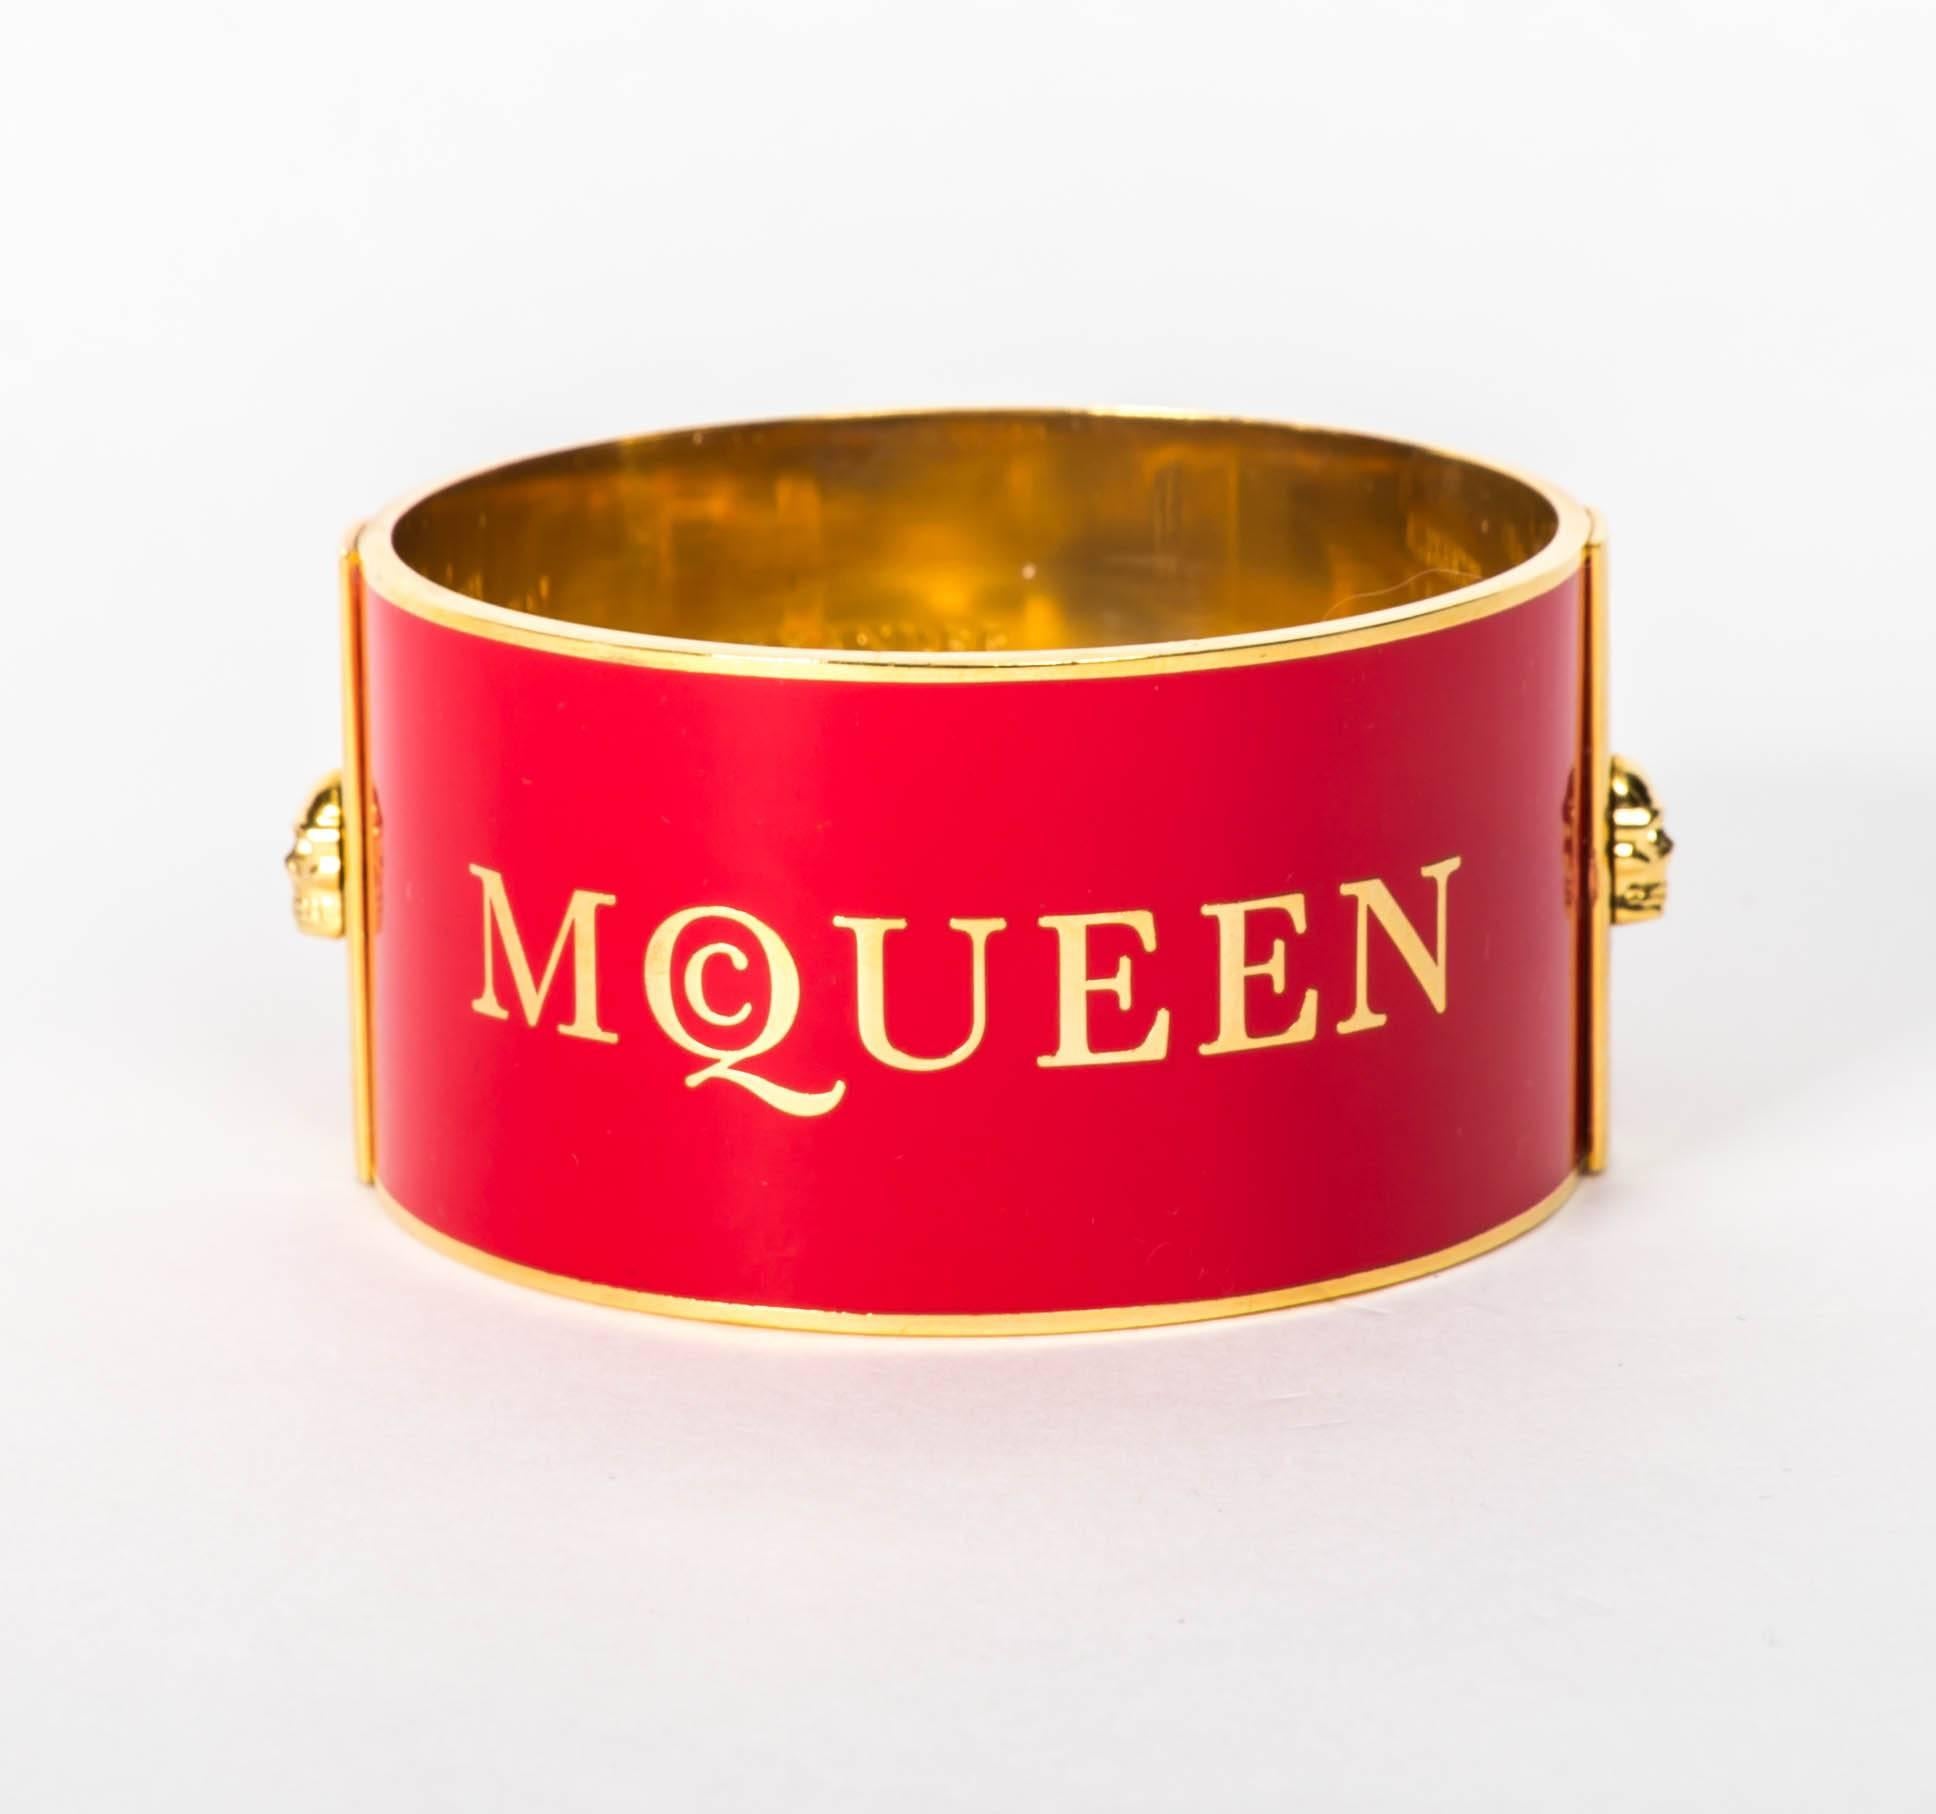 Alexander McQueen Red Enamel on Gold Metal Cuff / Bracelet
McQueen's Iconic skulls enhance each side of this fabulous cuff
This Cuff slips on the wrist and is 2 1/2 inches in diameter and 8 3/4 inches in circumference